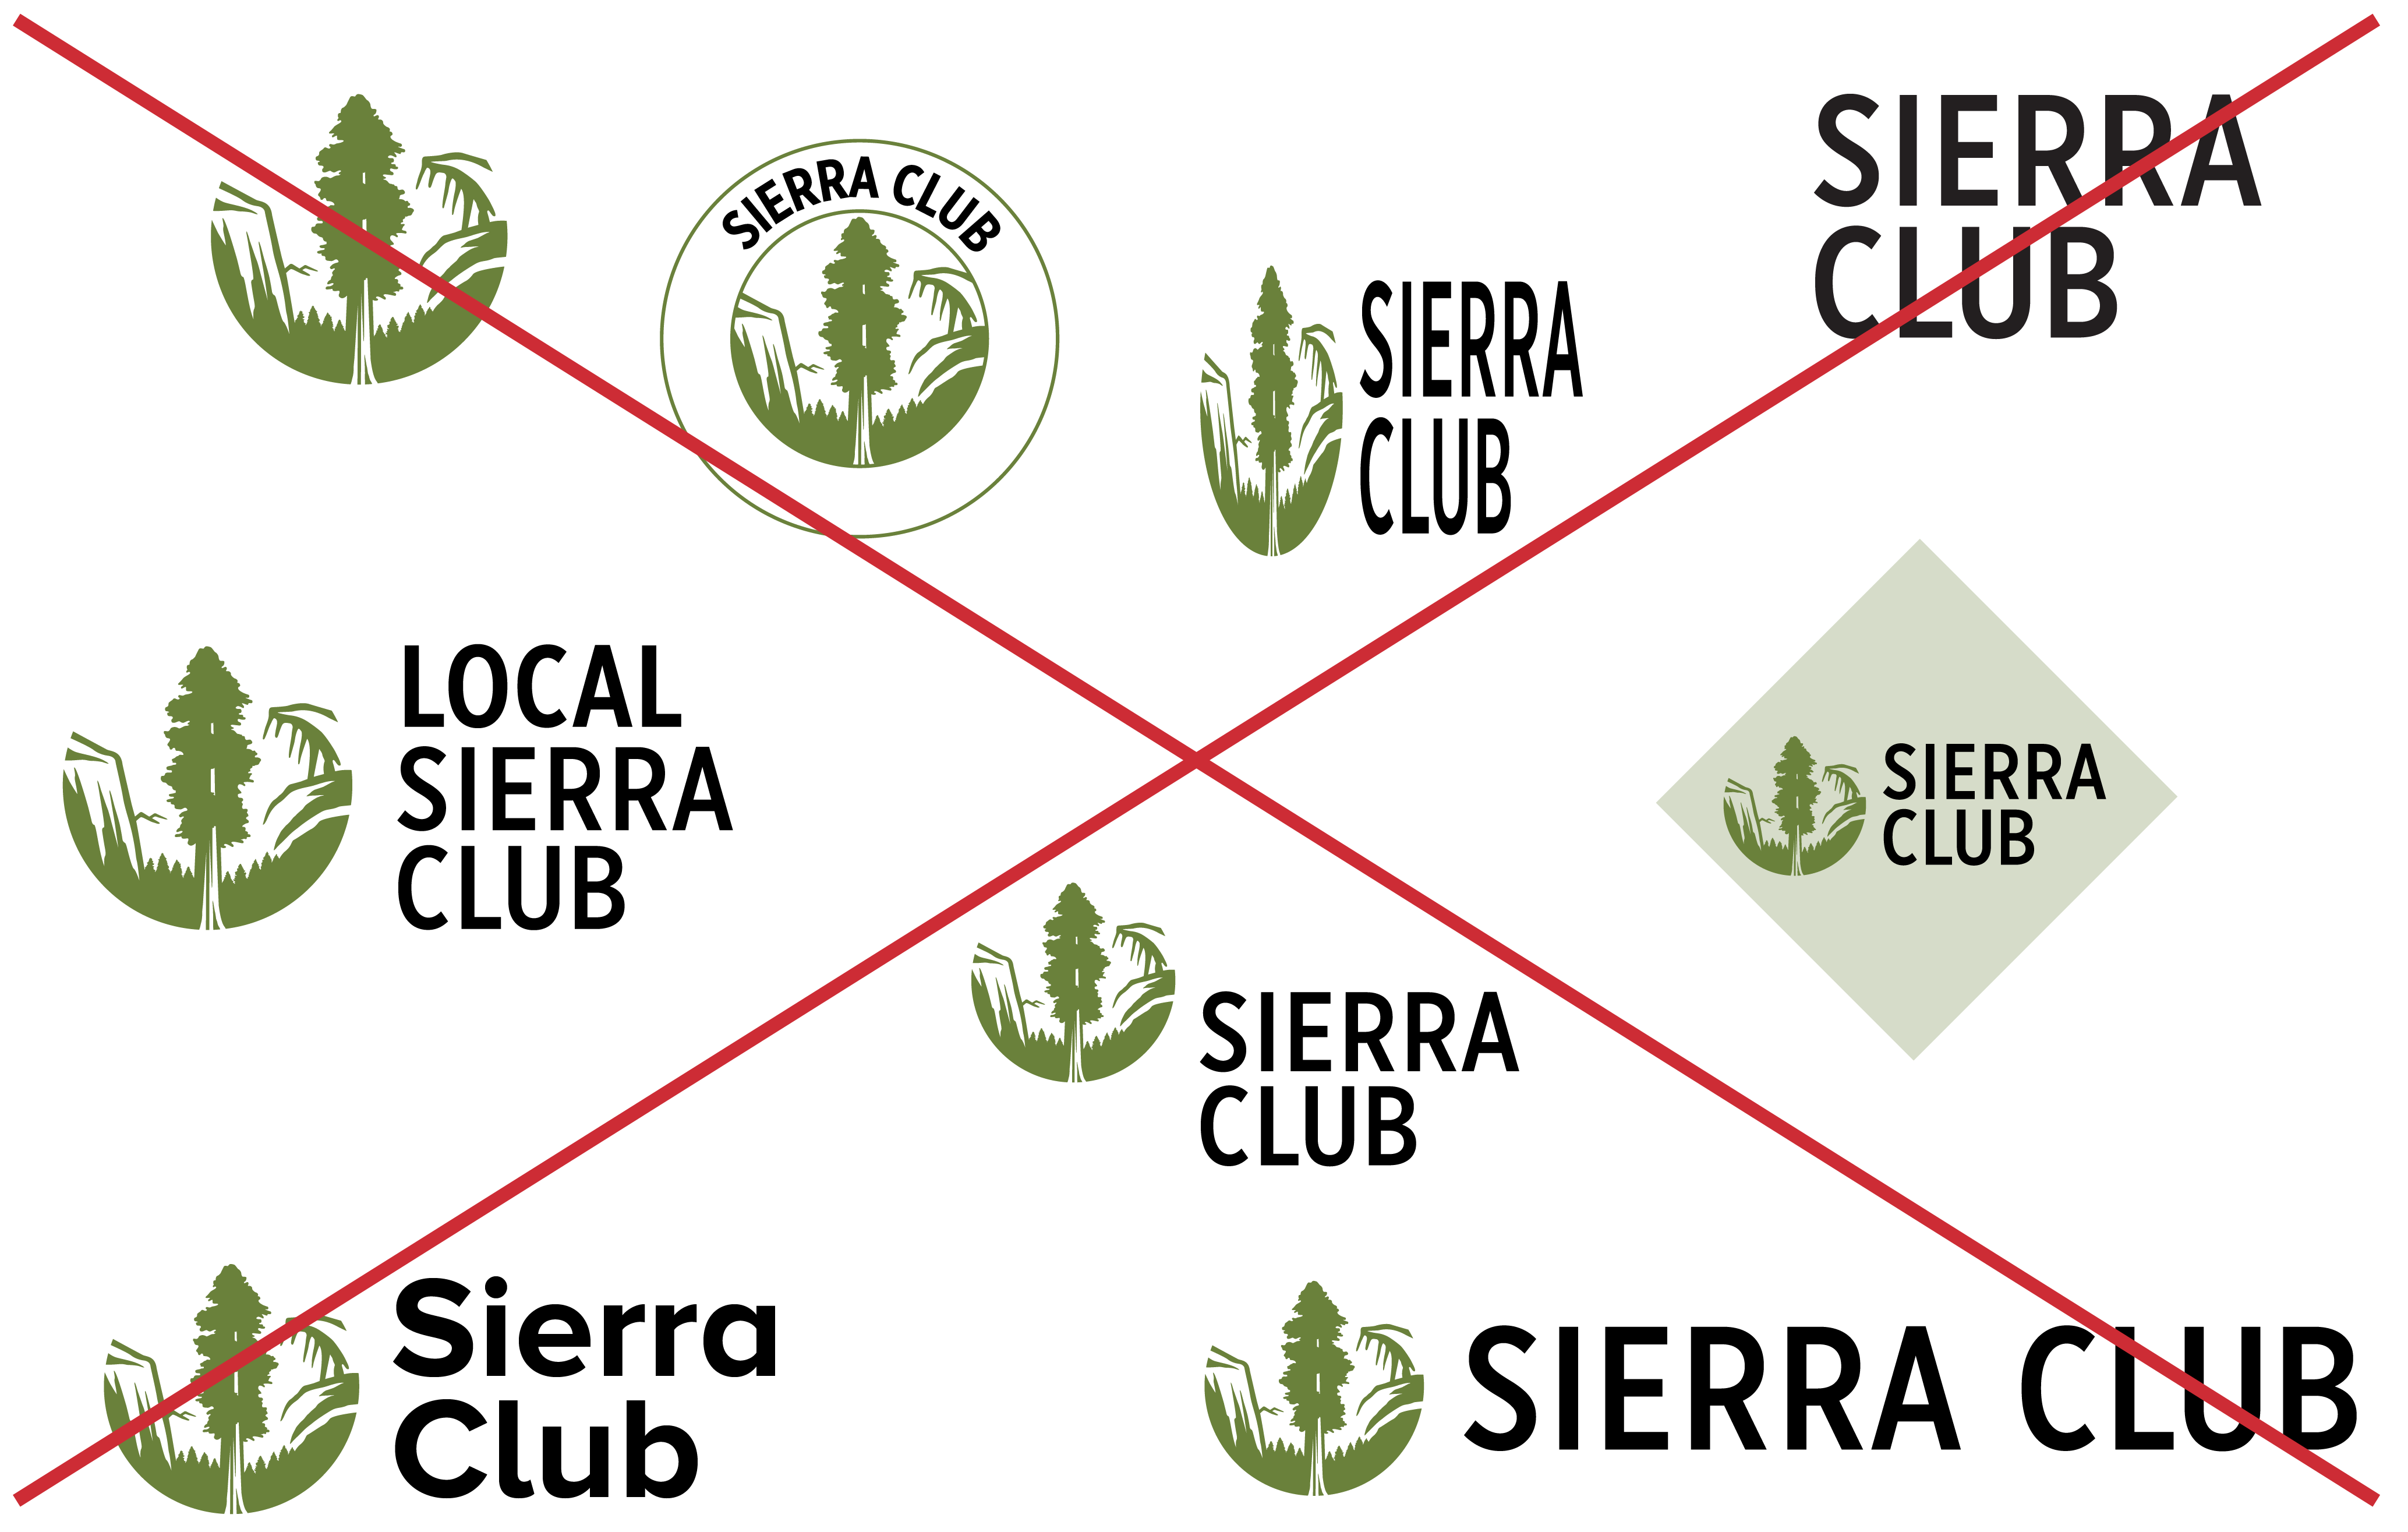 Collection of incorrect usage of Sierra Club logo